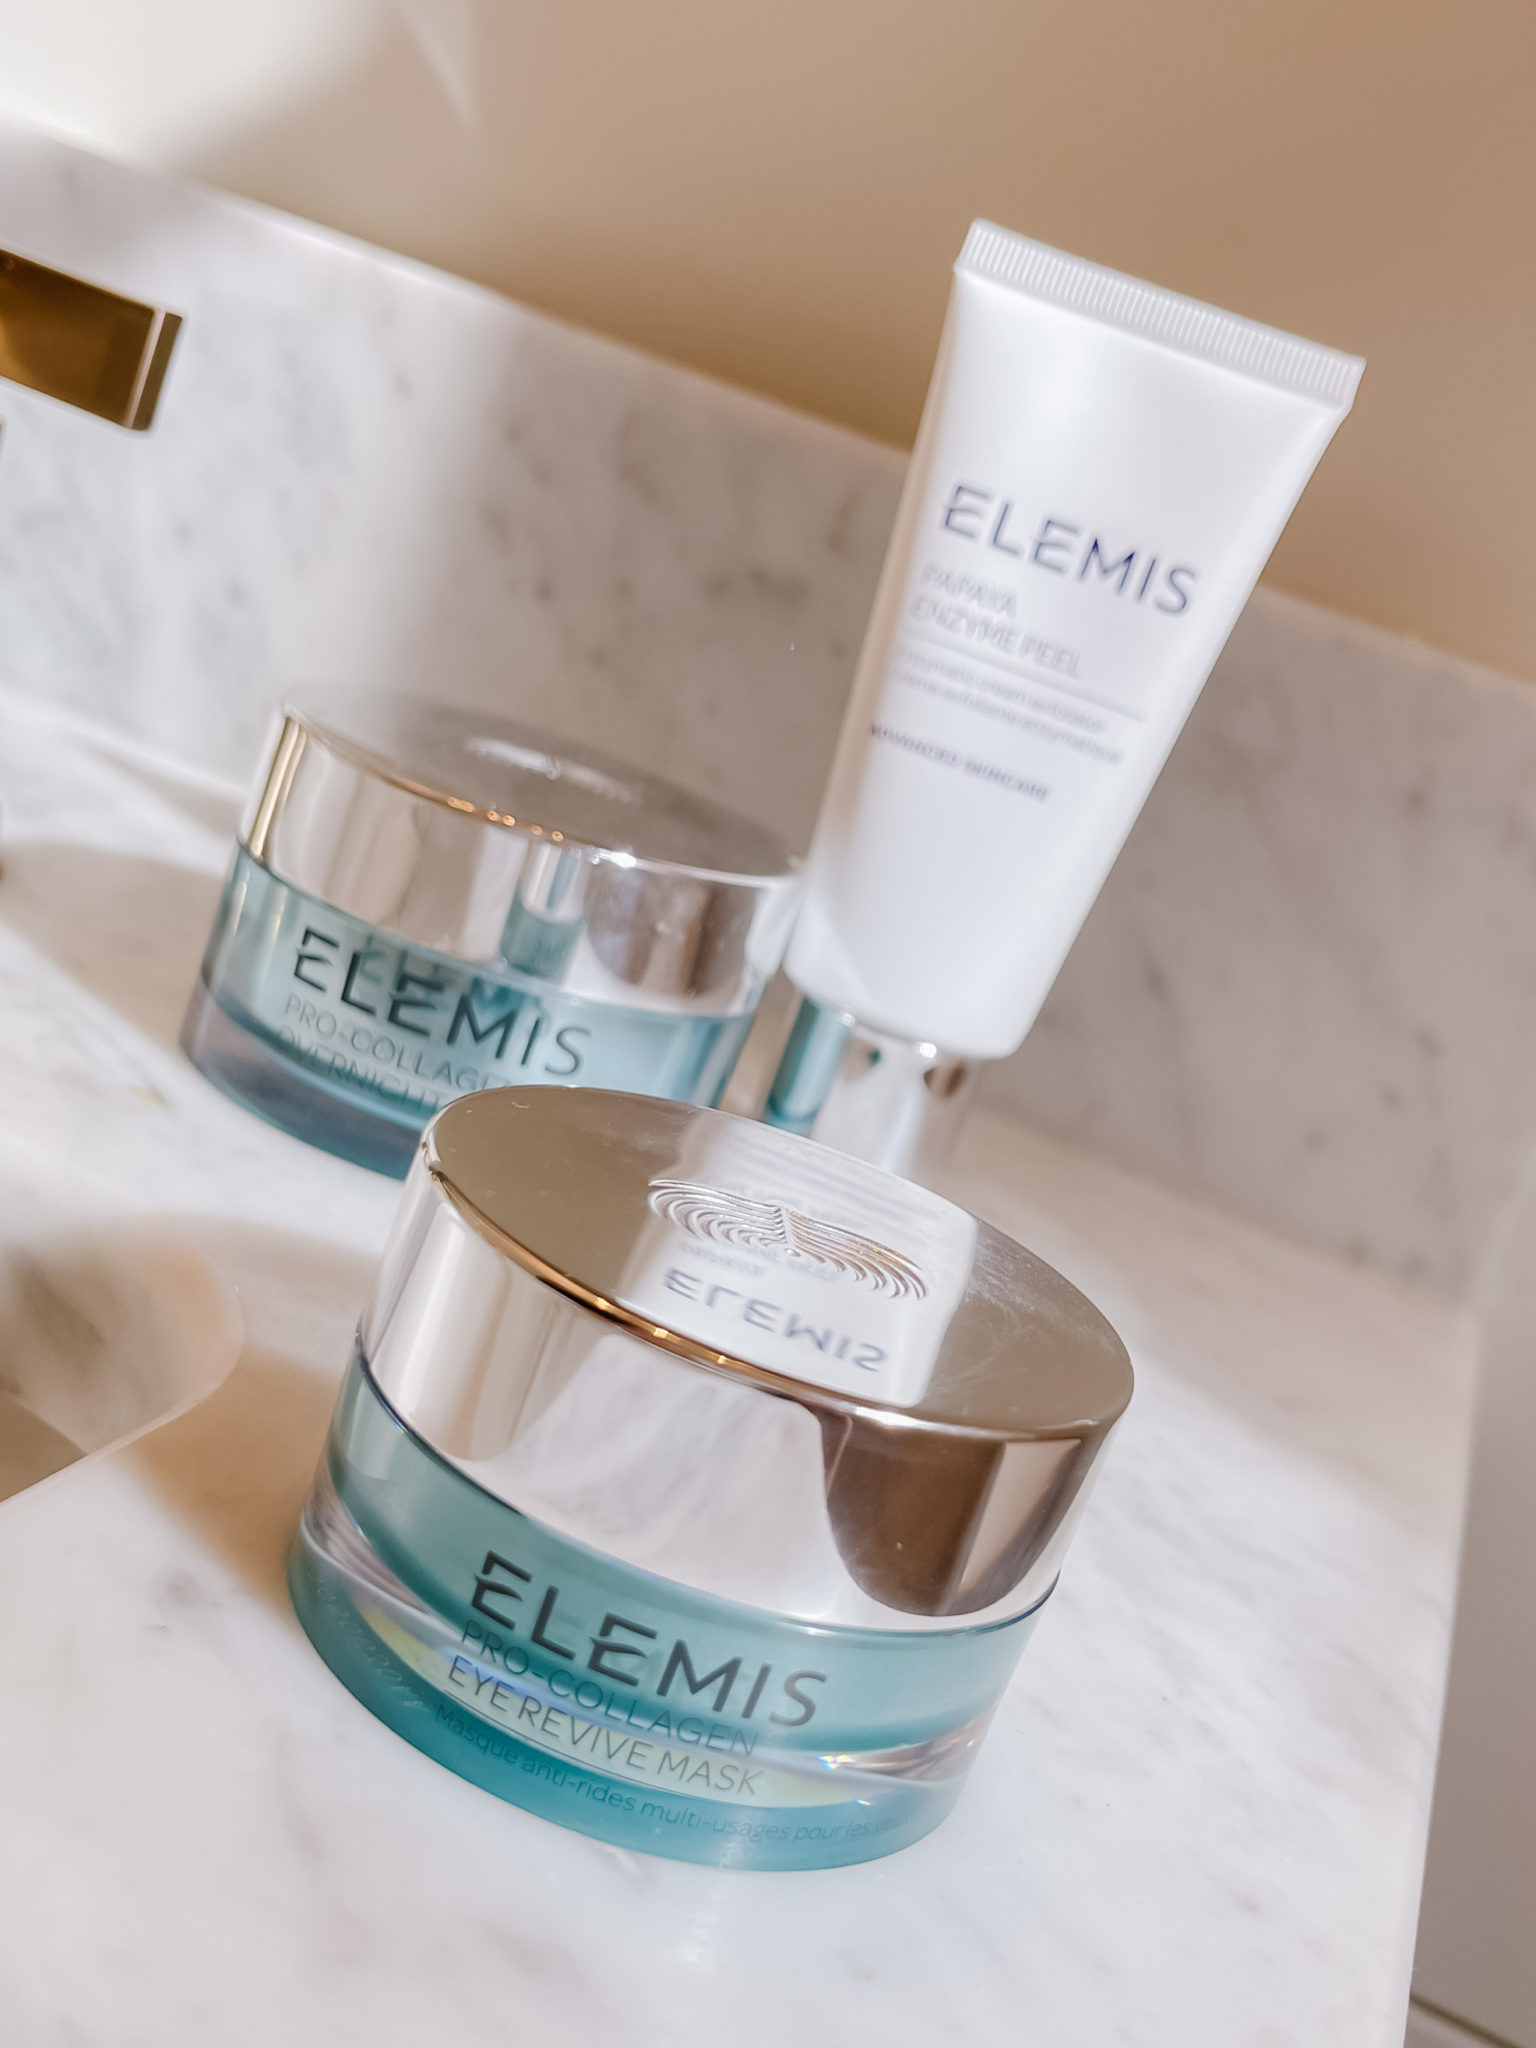 A Review of ELEMIS' Pro Collagen Eye Revive Mask